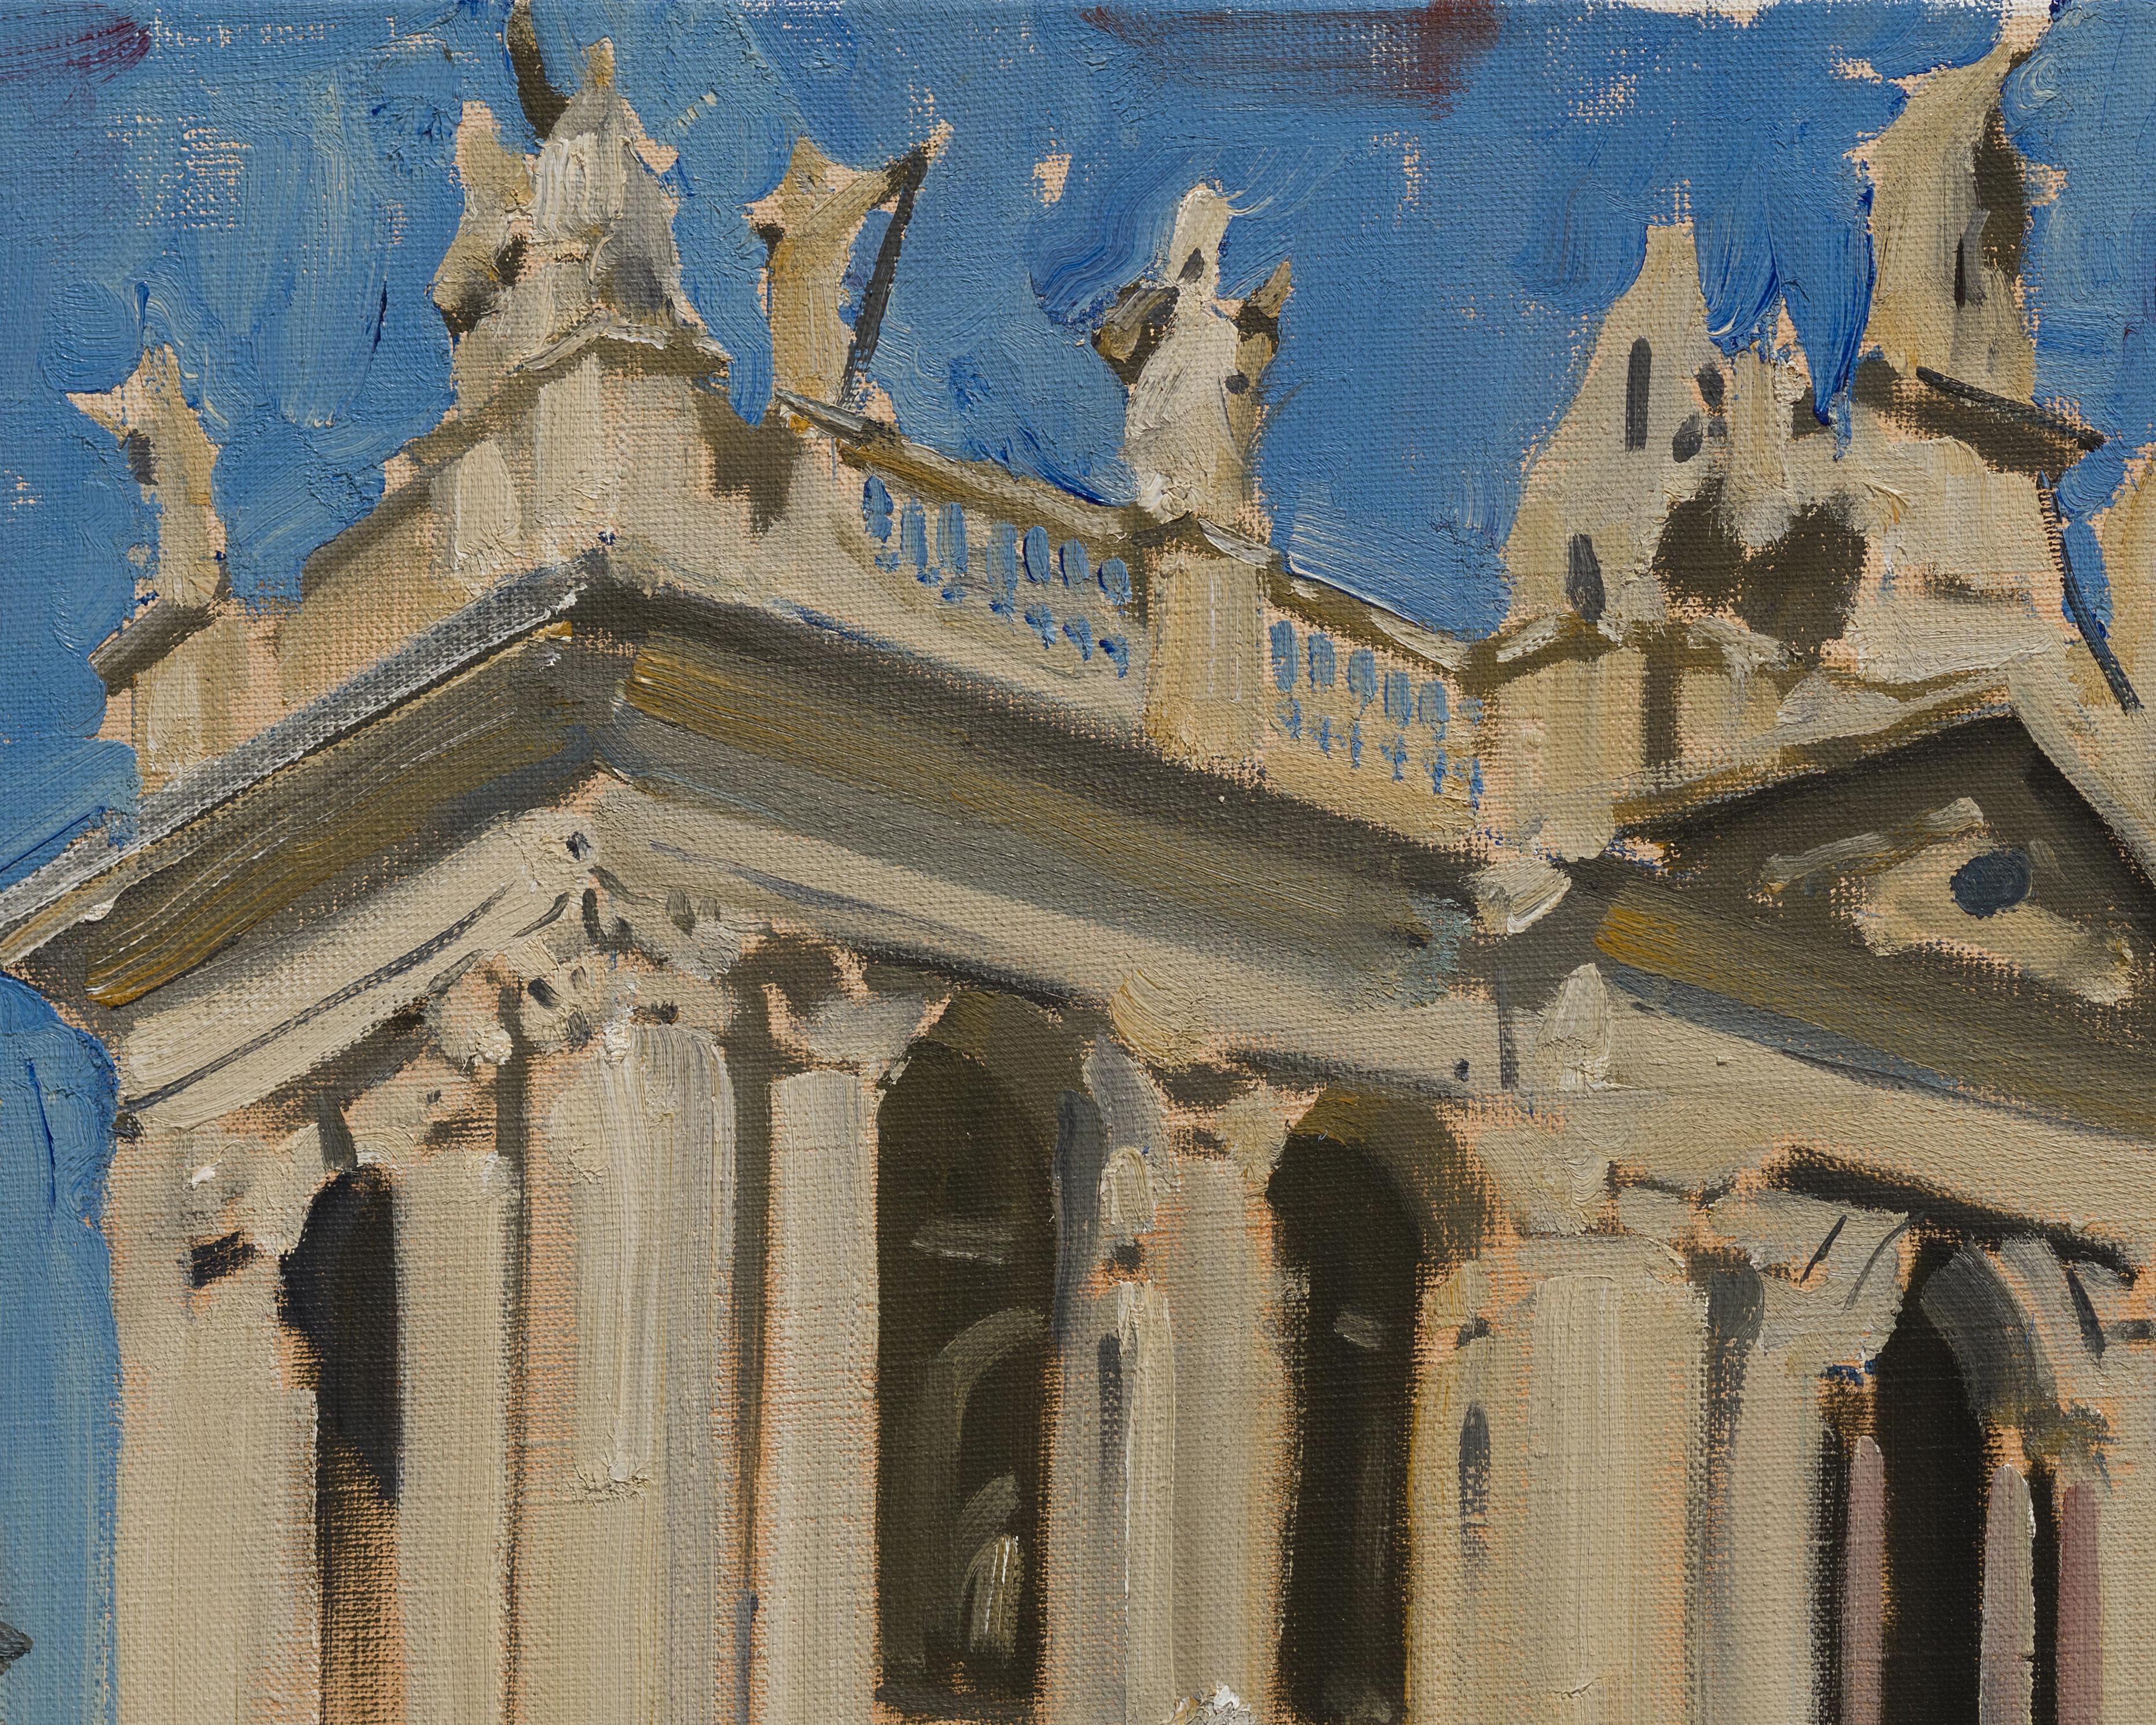 Basilica di San Giovanni in Laterano designed by Francesco Borromini is the oldest public church in the city of Rome, and the oldest basilica of the Western world. However, in the present brilliant study by Ilya Zorkin it is captured without